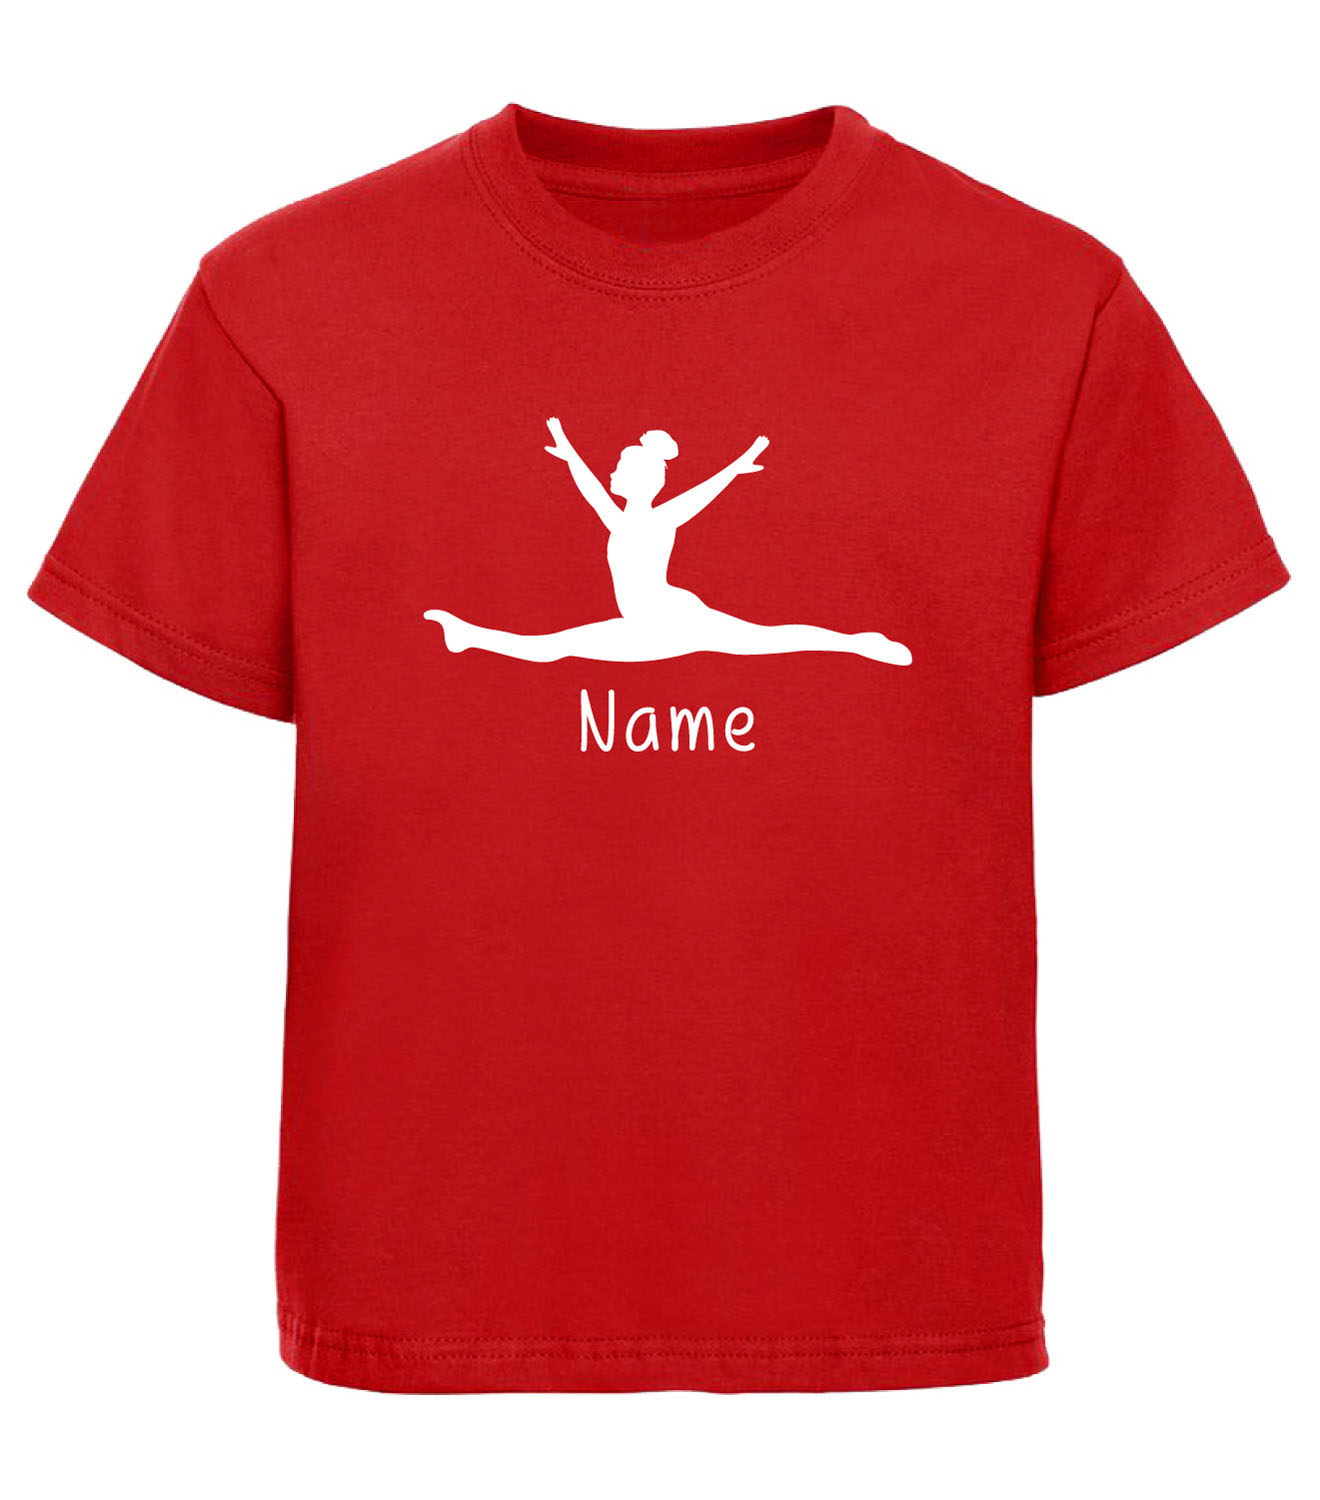 H/S AB PERSONALISED Gymnastics T shirt Gift TWO DESIGNS TO CHOOSE FROM 